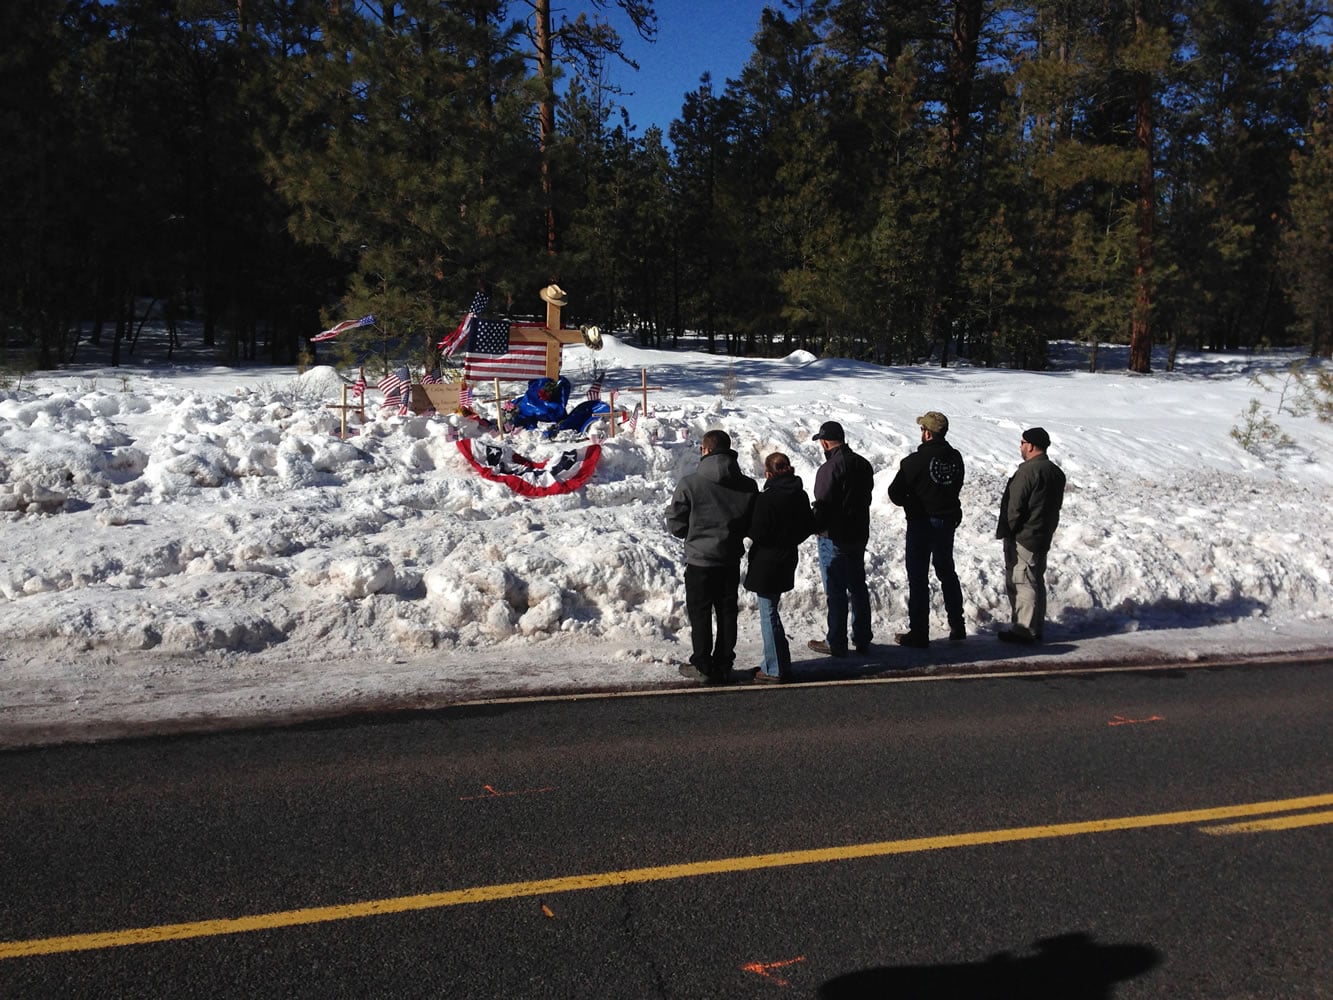 Mourners gather Jan. 31 at a roadside memorial for rancher LaVoy Finicum near Burns, Oregon. Finicum was killed Jan. 26 in a confrontation with the FBI and Oregon State Police on a remote road. (AP Photo/Nick K.